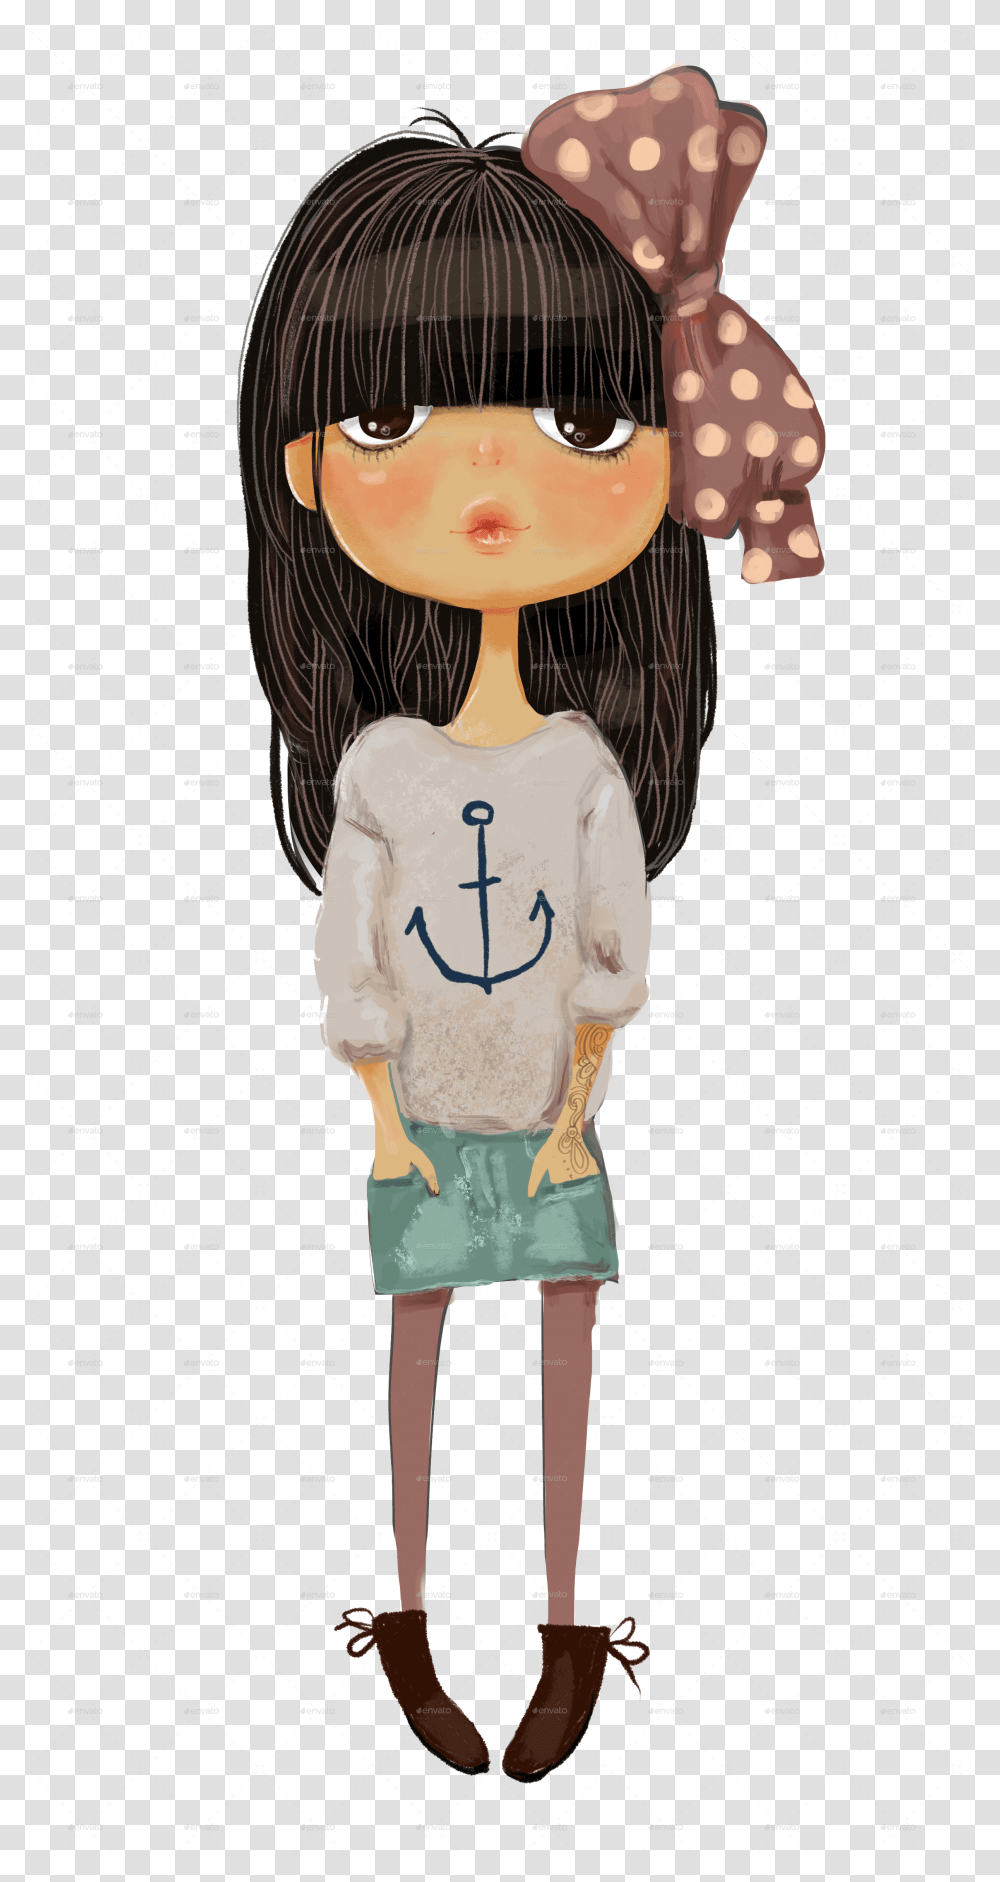 Collection With 6 Cartoon Girls Black Hair Girl Cartoon, Clothing, Doll, Toy, Figurine Transparent Png